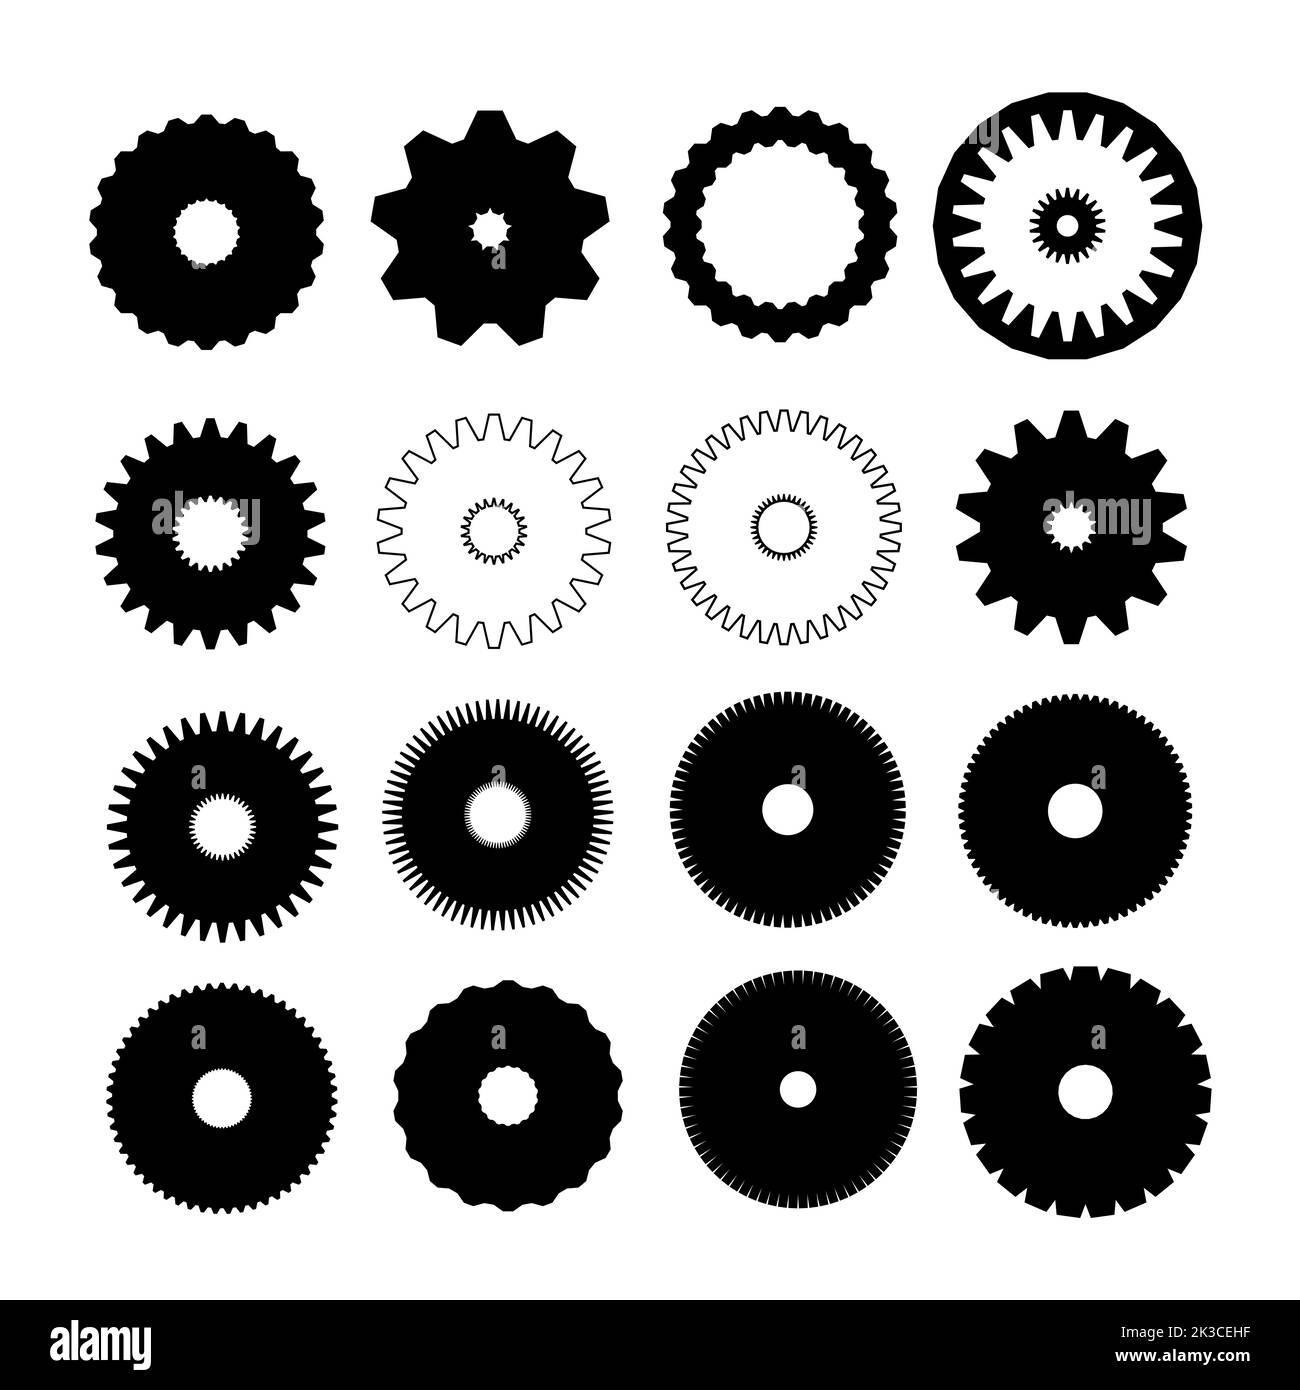 Industrial gears icons collection isolated over white background, illustration Stock Photo